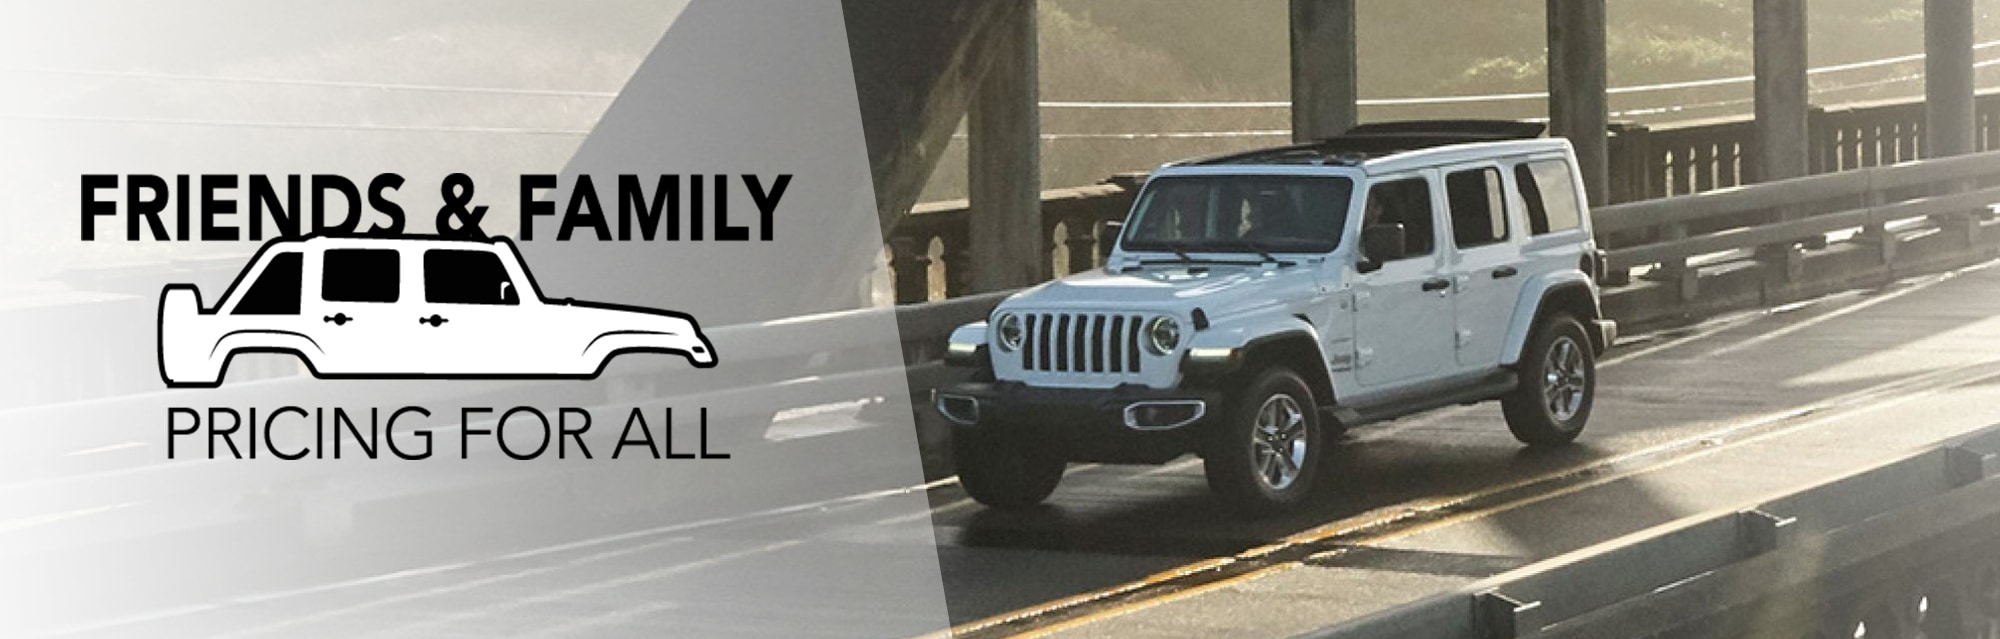 Jeep Friends & Family Discount Tom Ahl Chrysler Dodge Jeep Ram